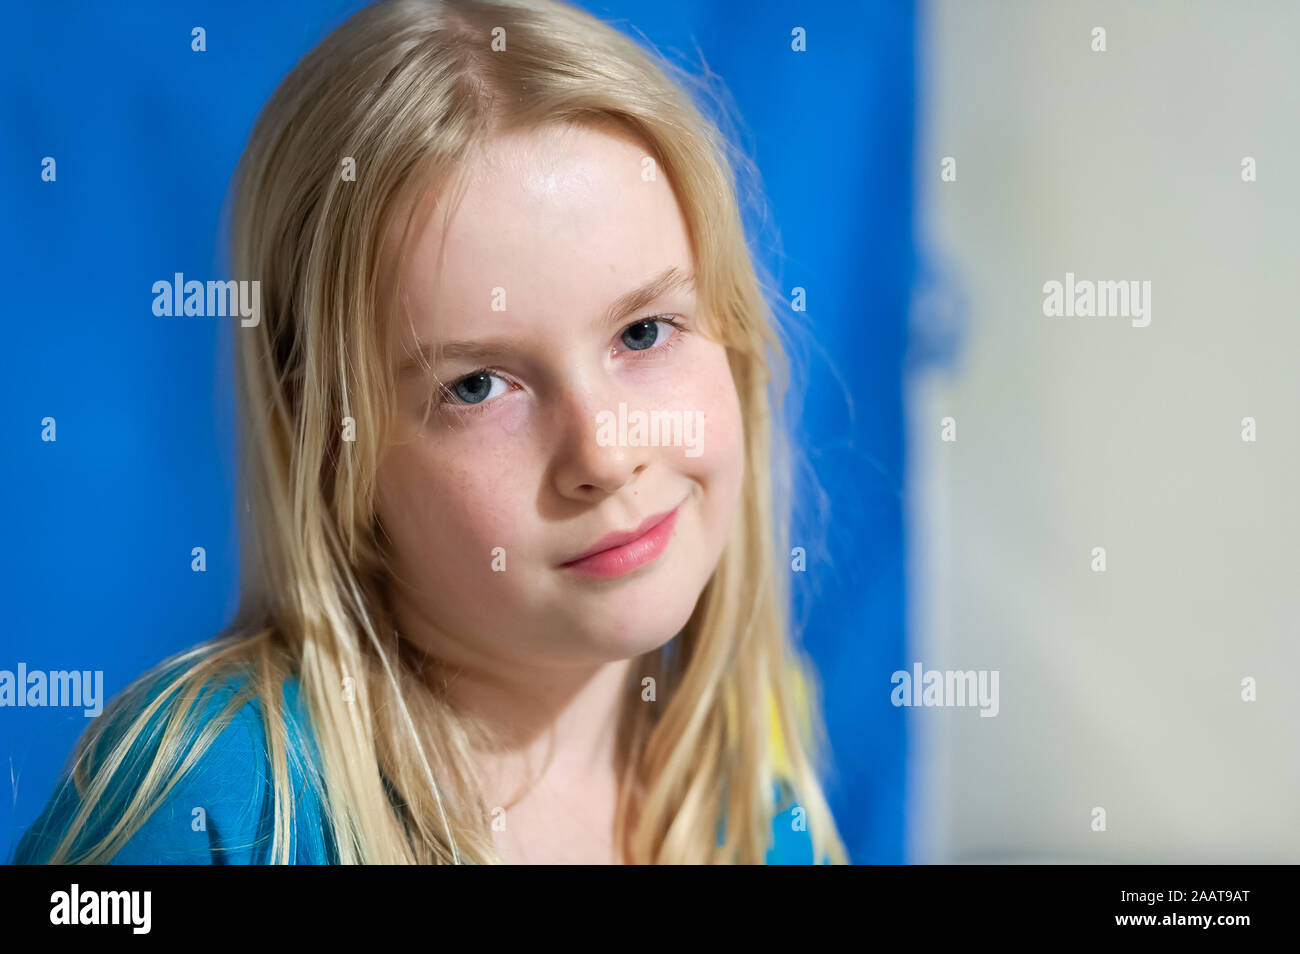 Pretty young blonde girl with blue eyes and an enigmatic smile Stock Photo